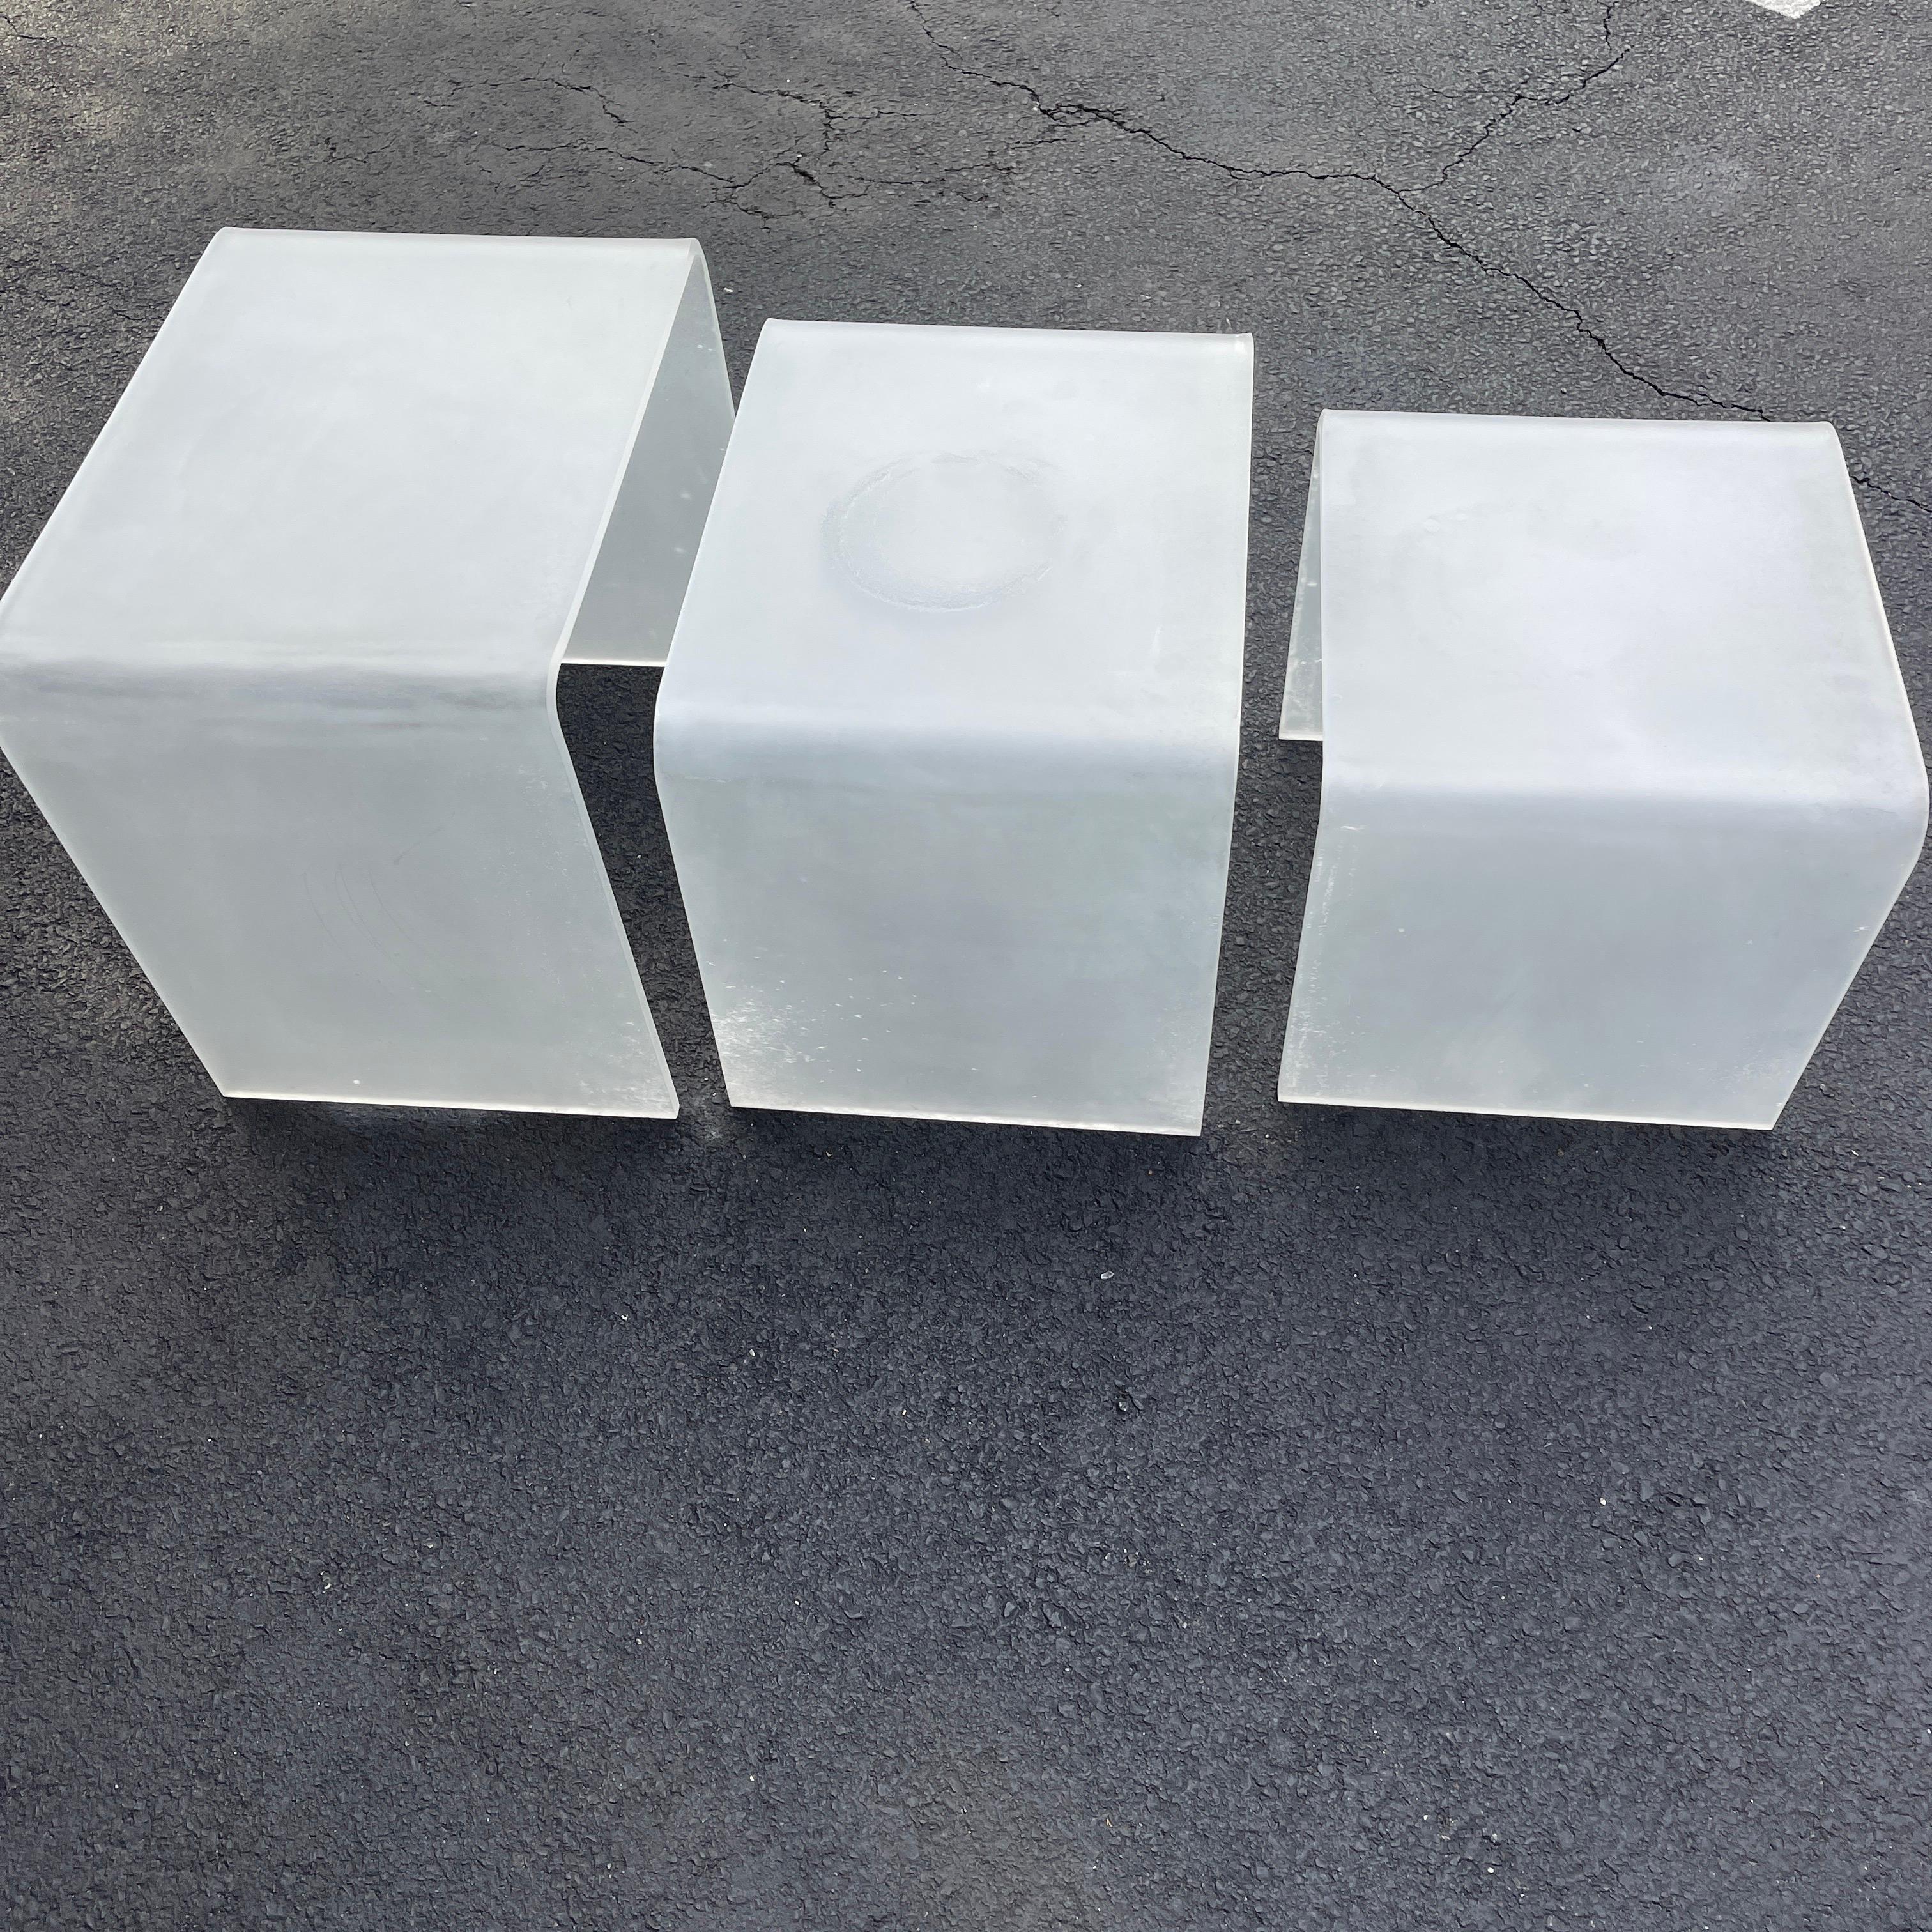 American set of 3 Frosted Lucite Nesting Side Tables  For Sale 4